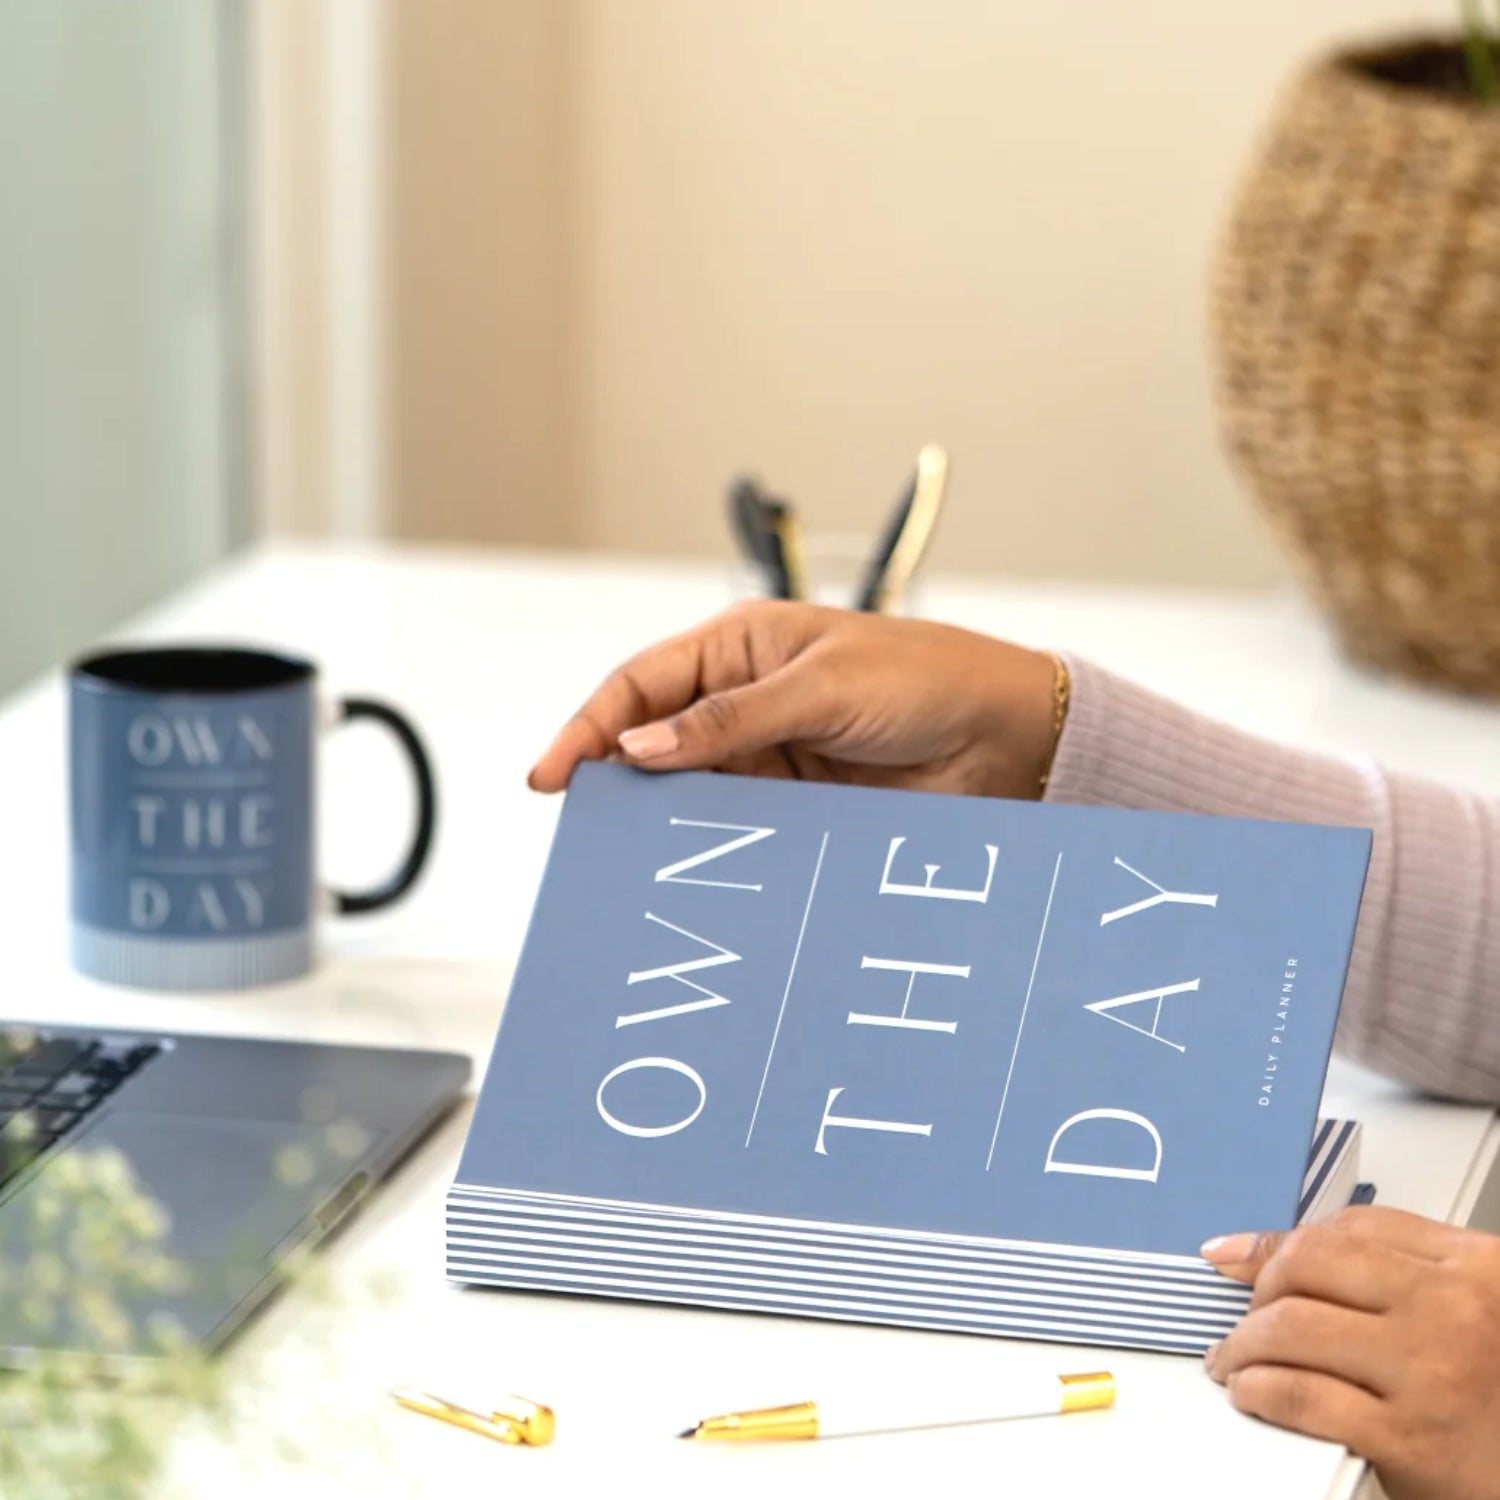 OWN THE DAY(BLUE) - Undated Daily Planner